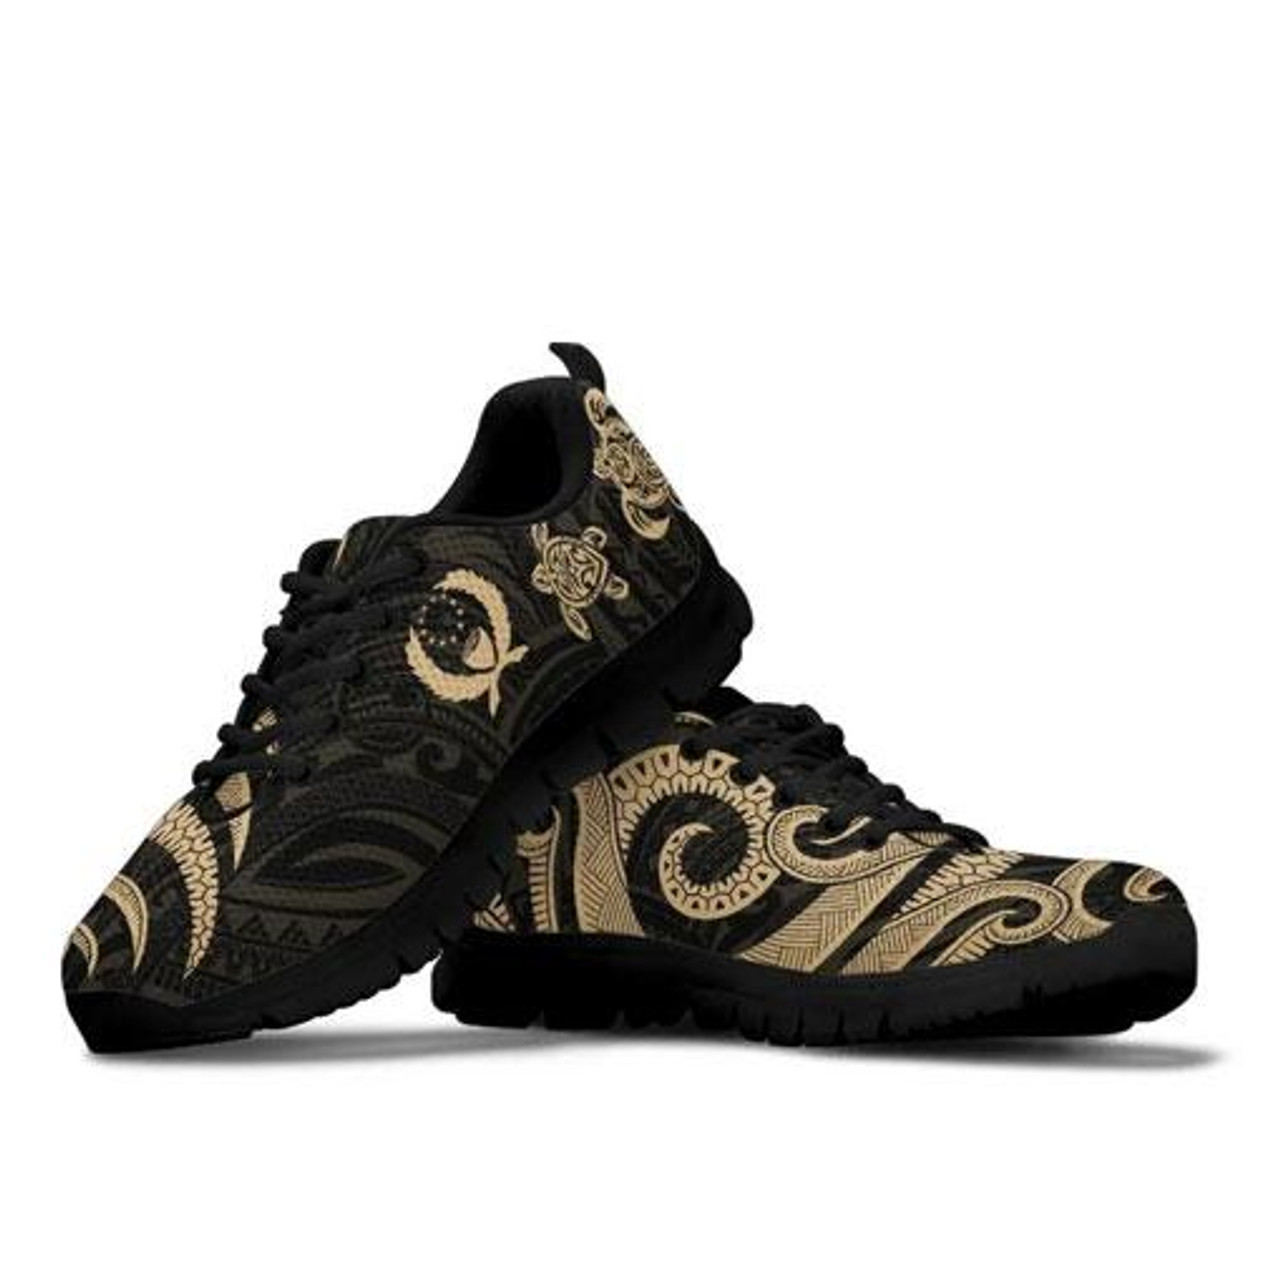 Pohnpei Micronesian Sneakers - Gold Tentacle Turtle 2